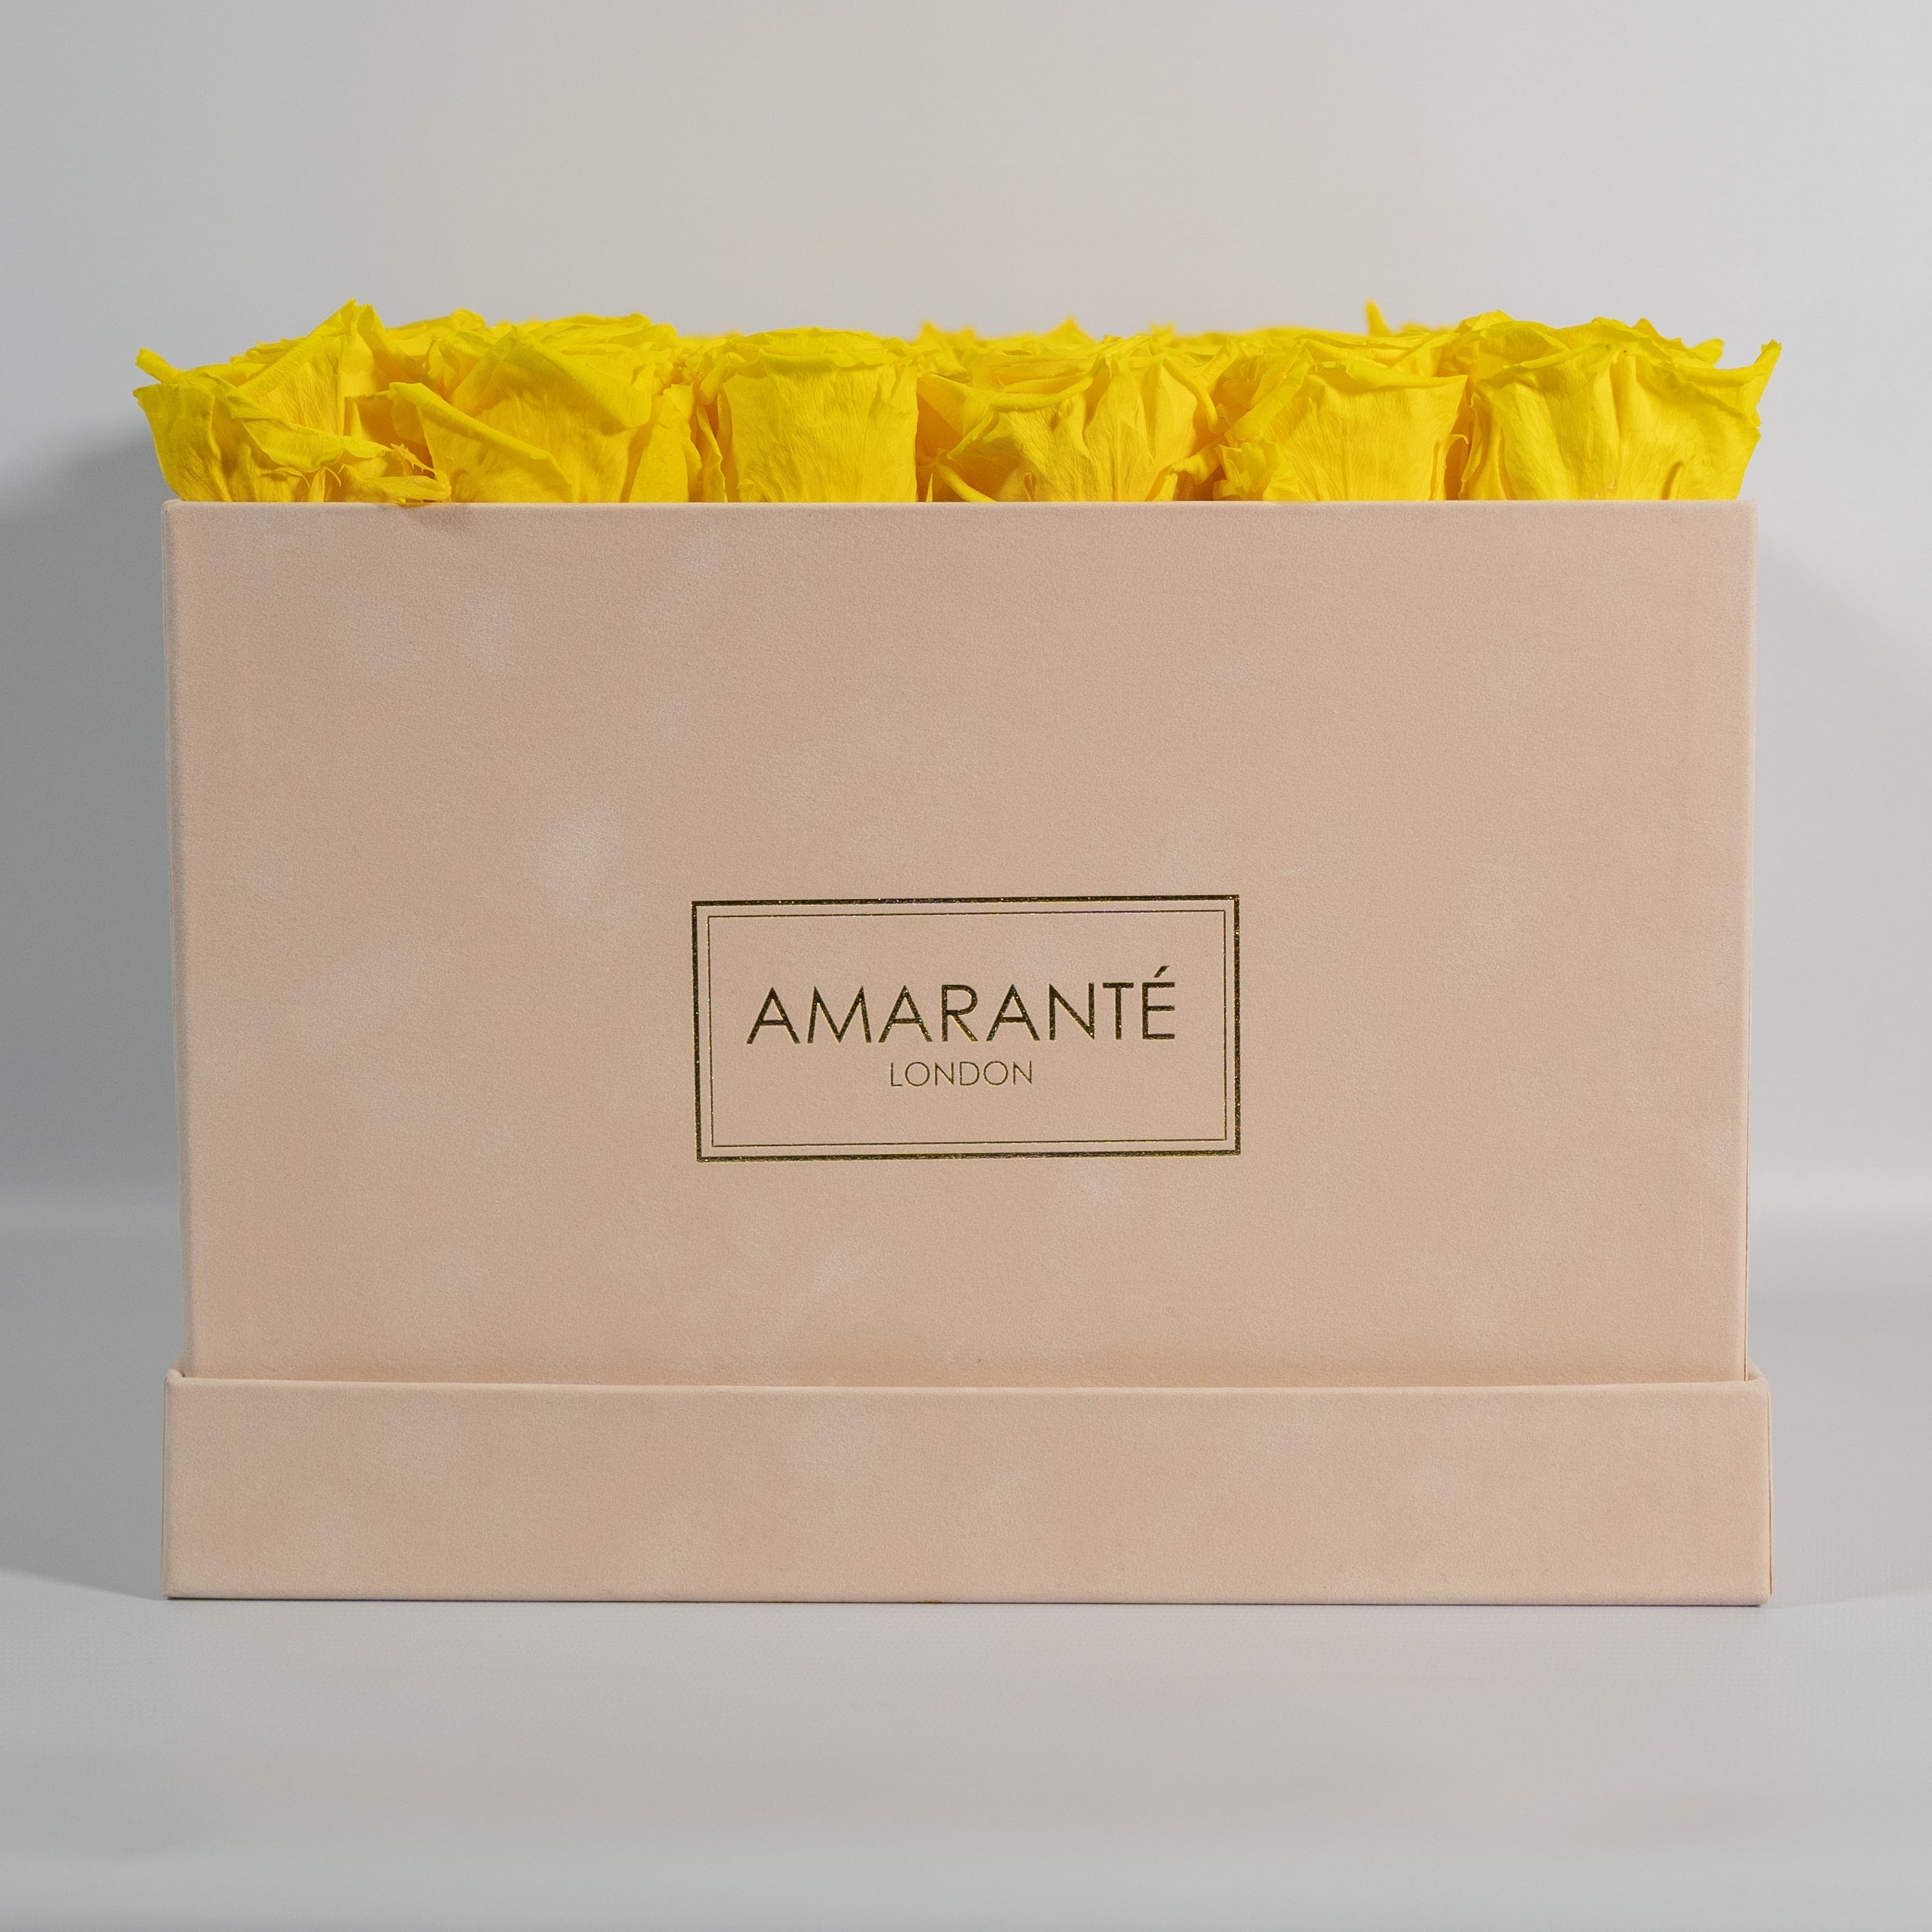 Delightful yellow Roses in a blushing beige box.